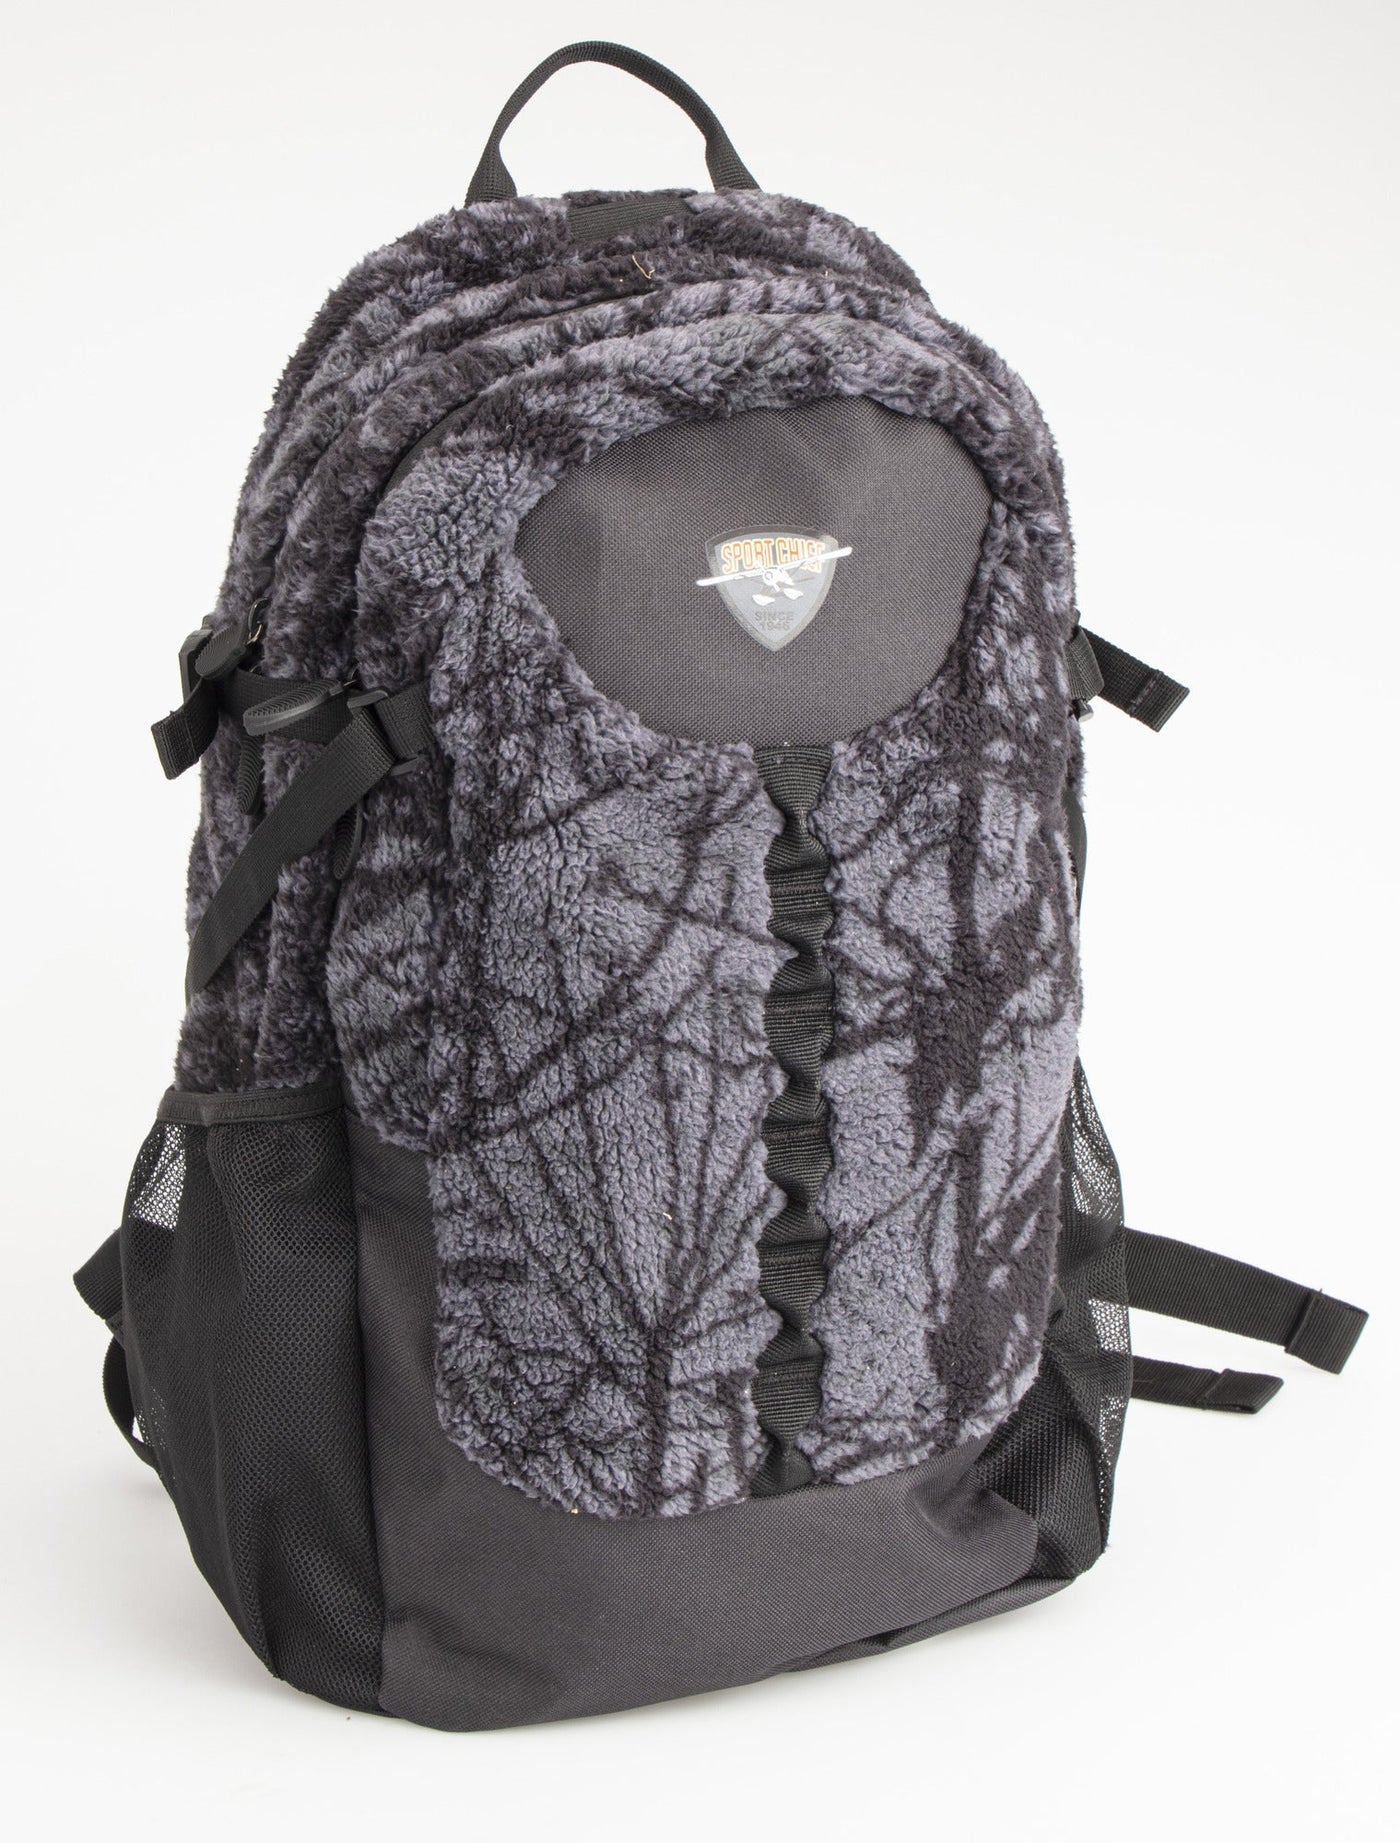 Sac à dos de chasse "Ghost" ultra silencieux - Sportchief